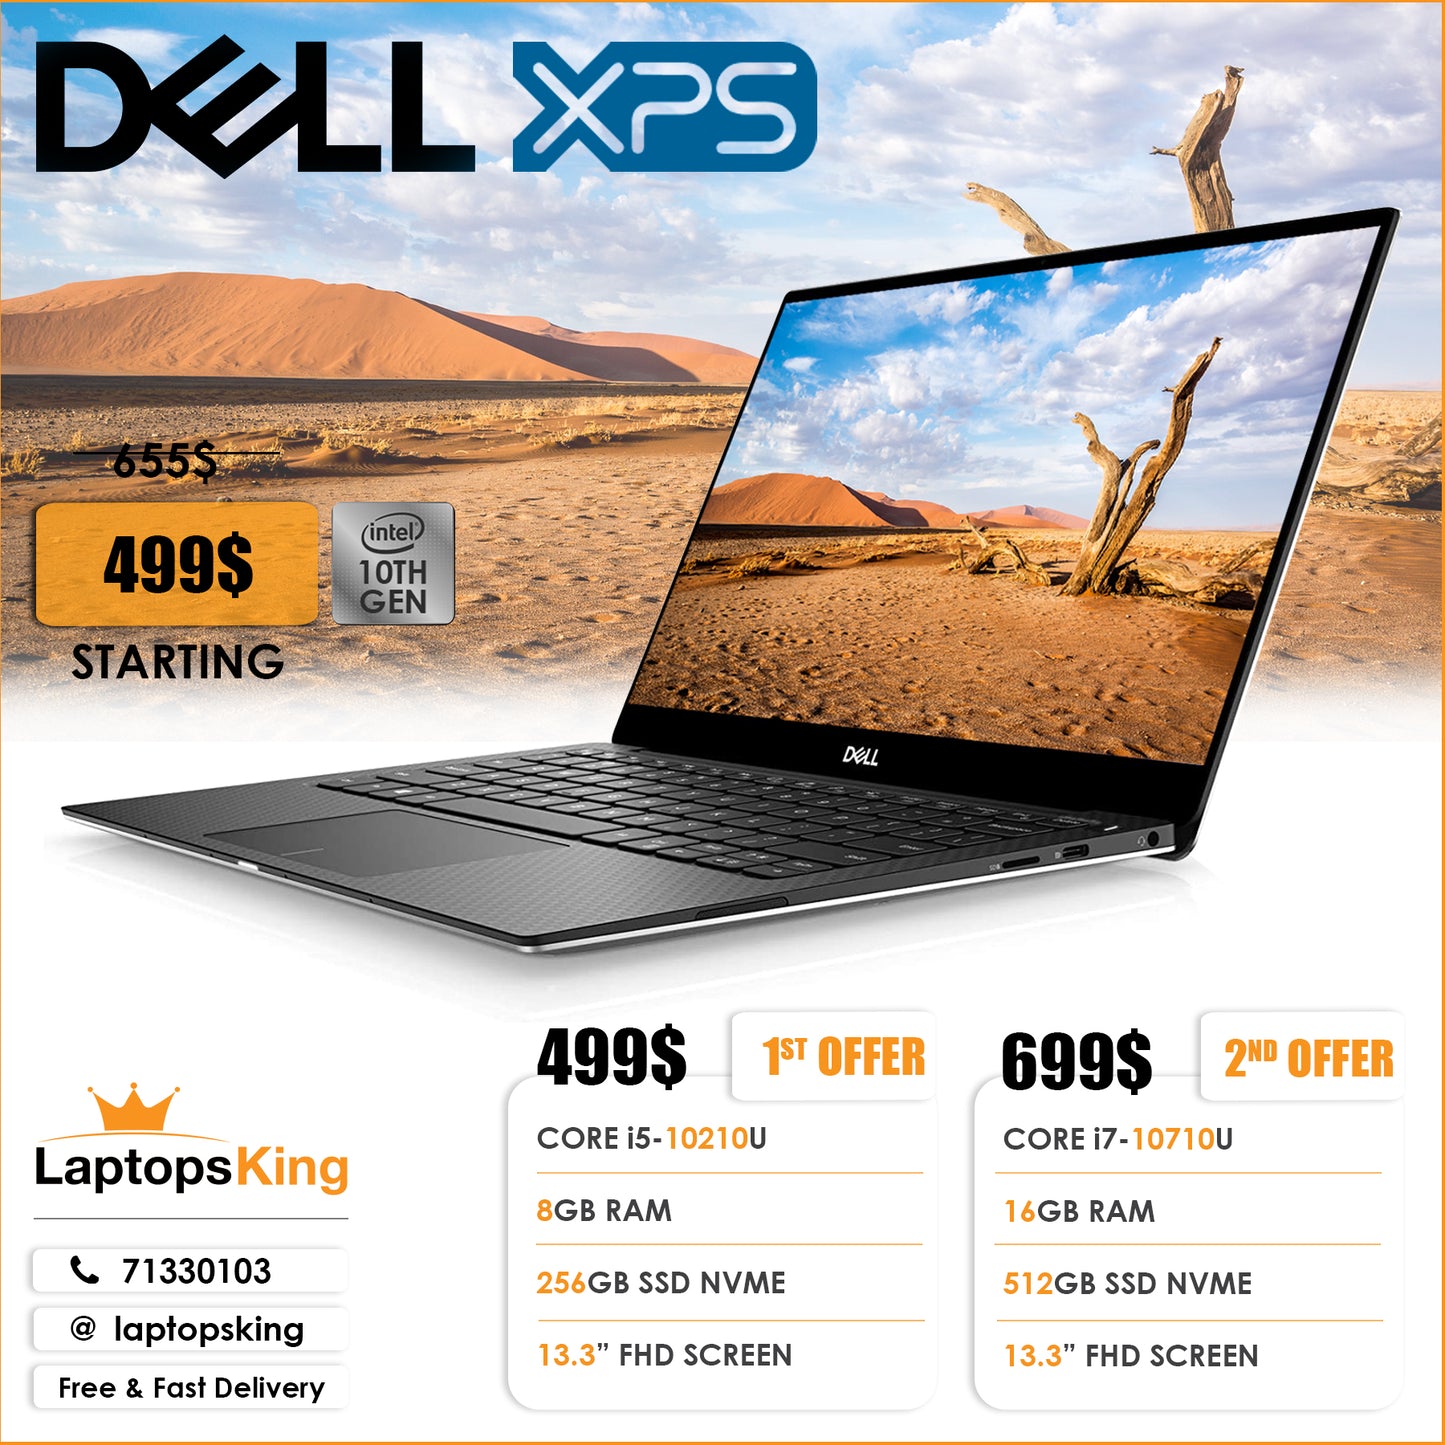 Dell XPS 13 7390 10th Gen Cpu 13.3" Screen Laptop Offers (New OB)